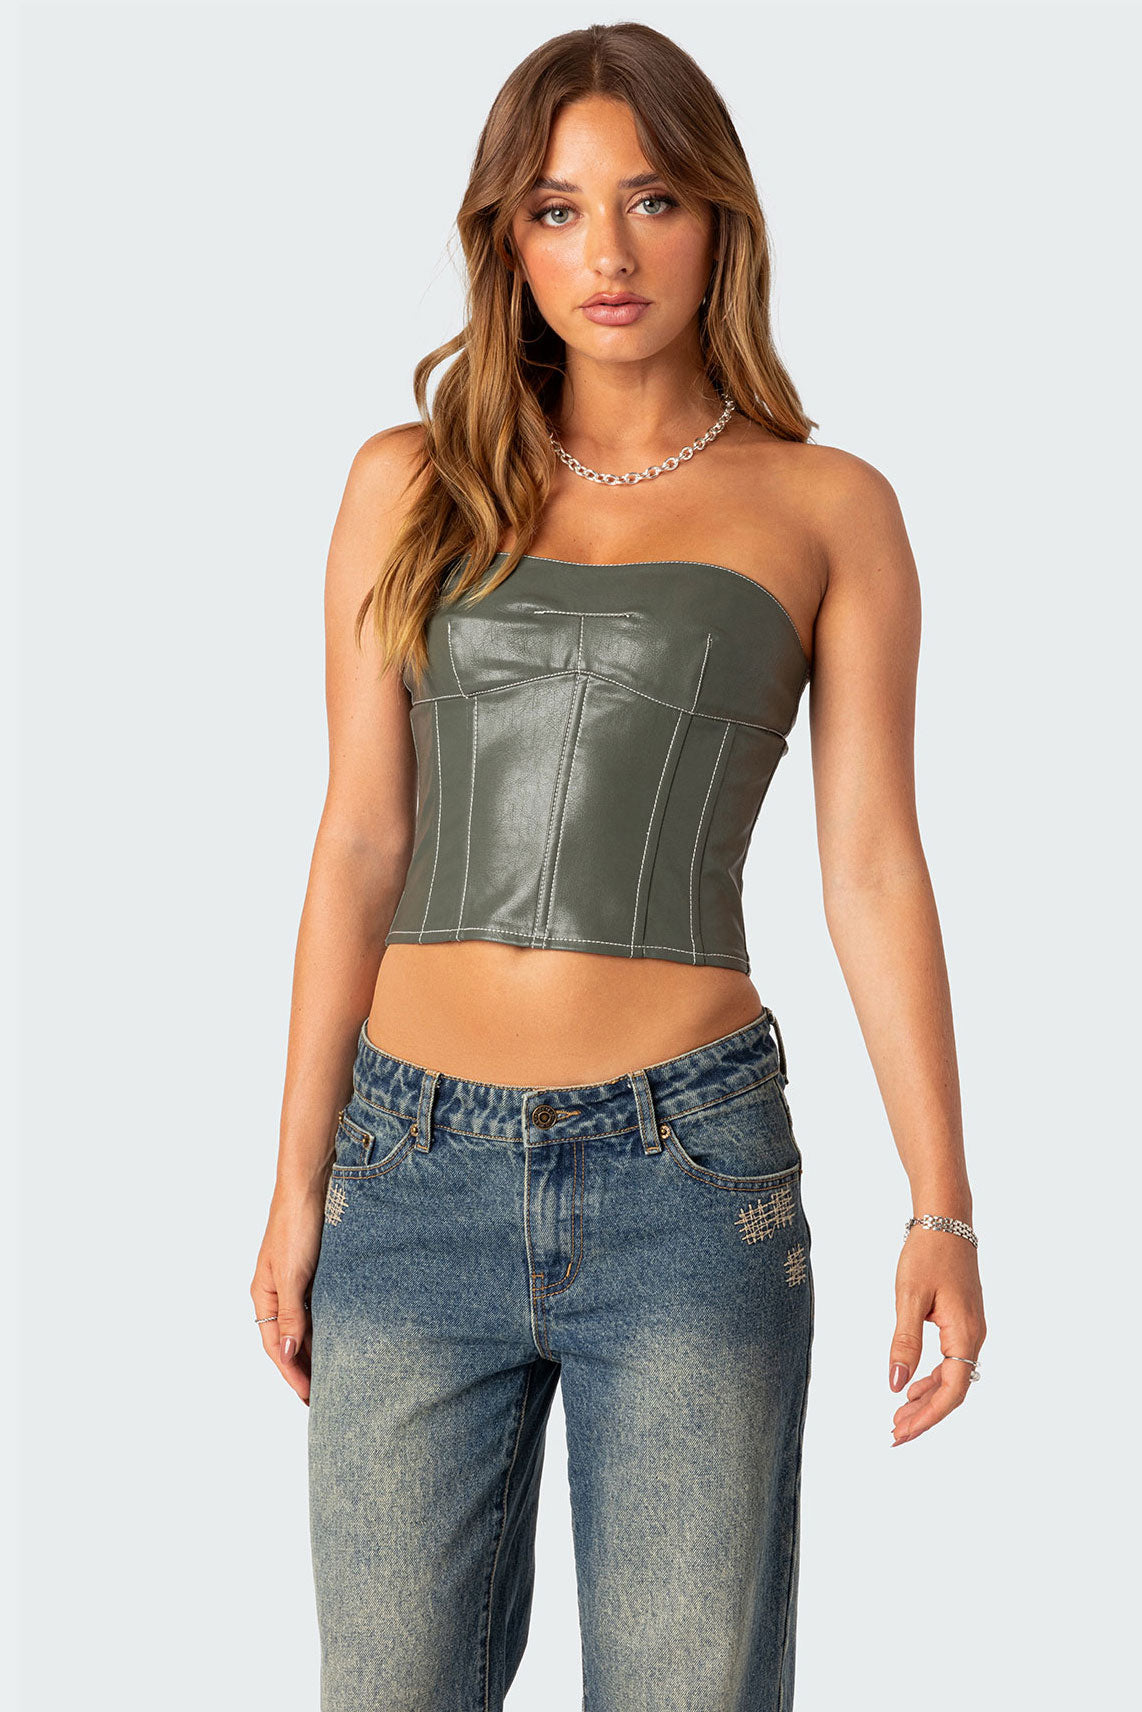 Moss Faux Leather Lace Up Corset